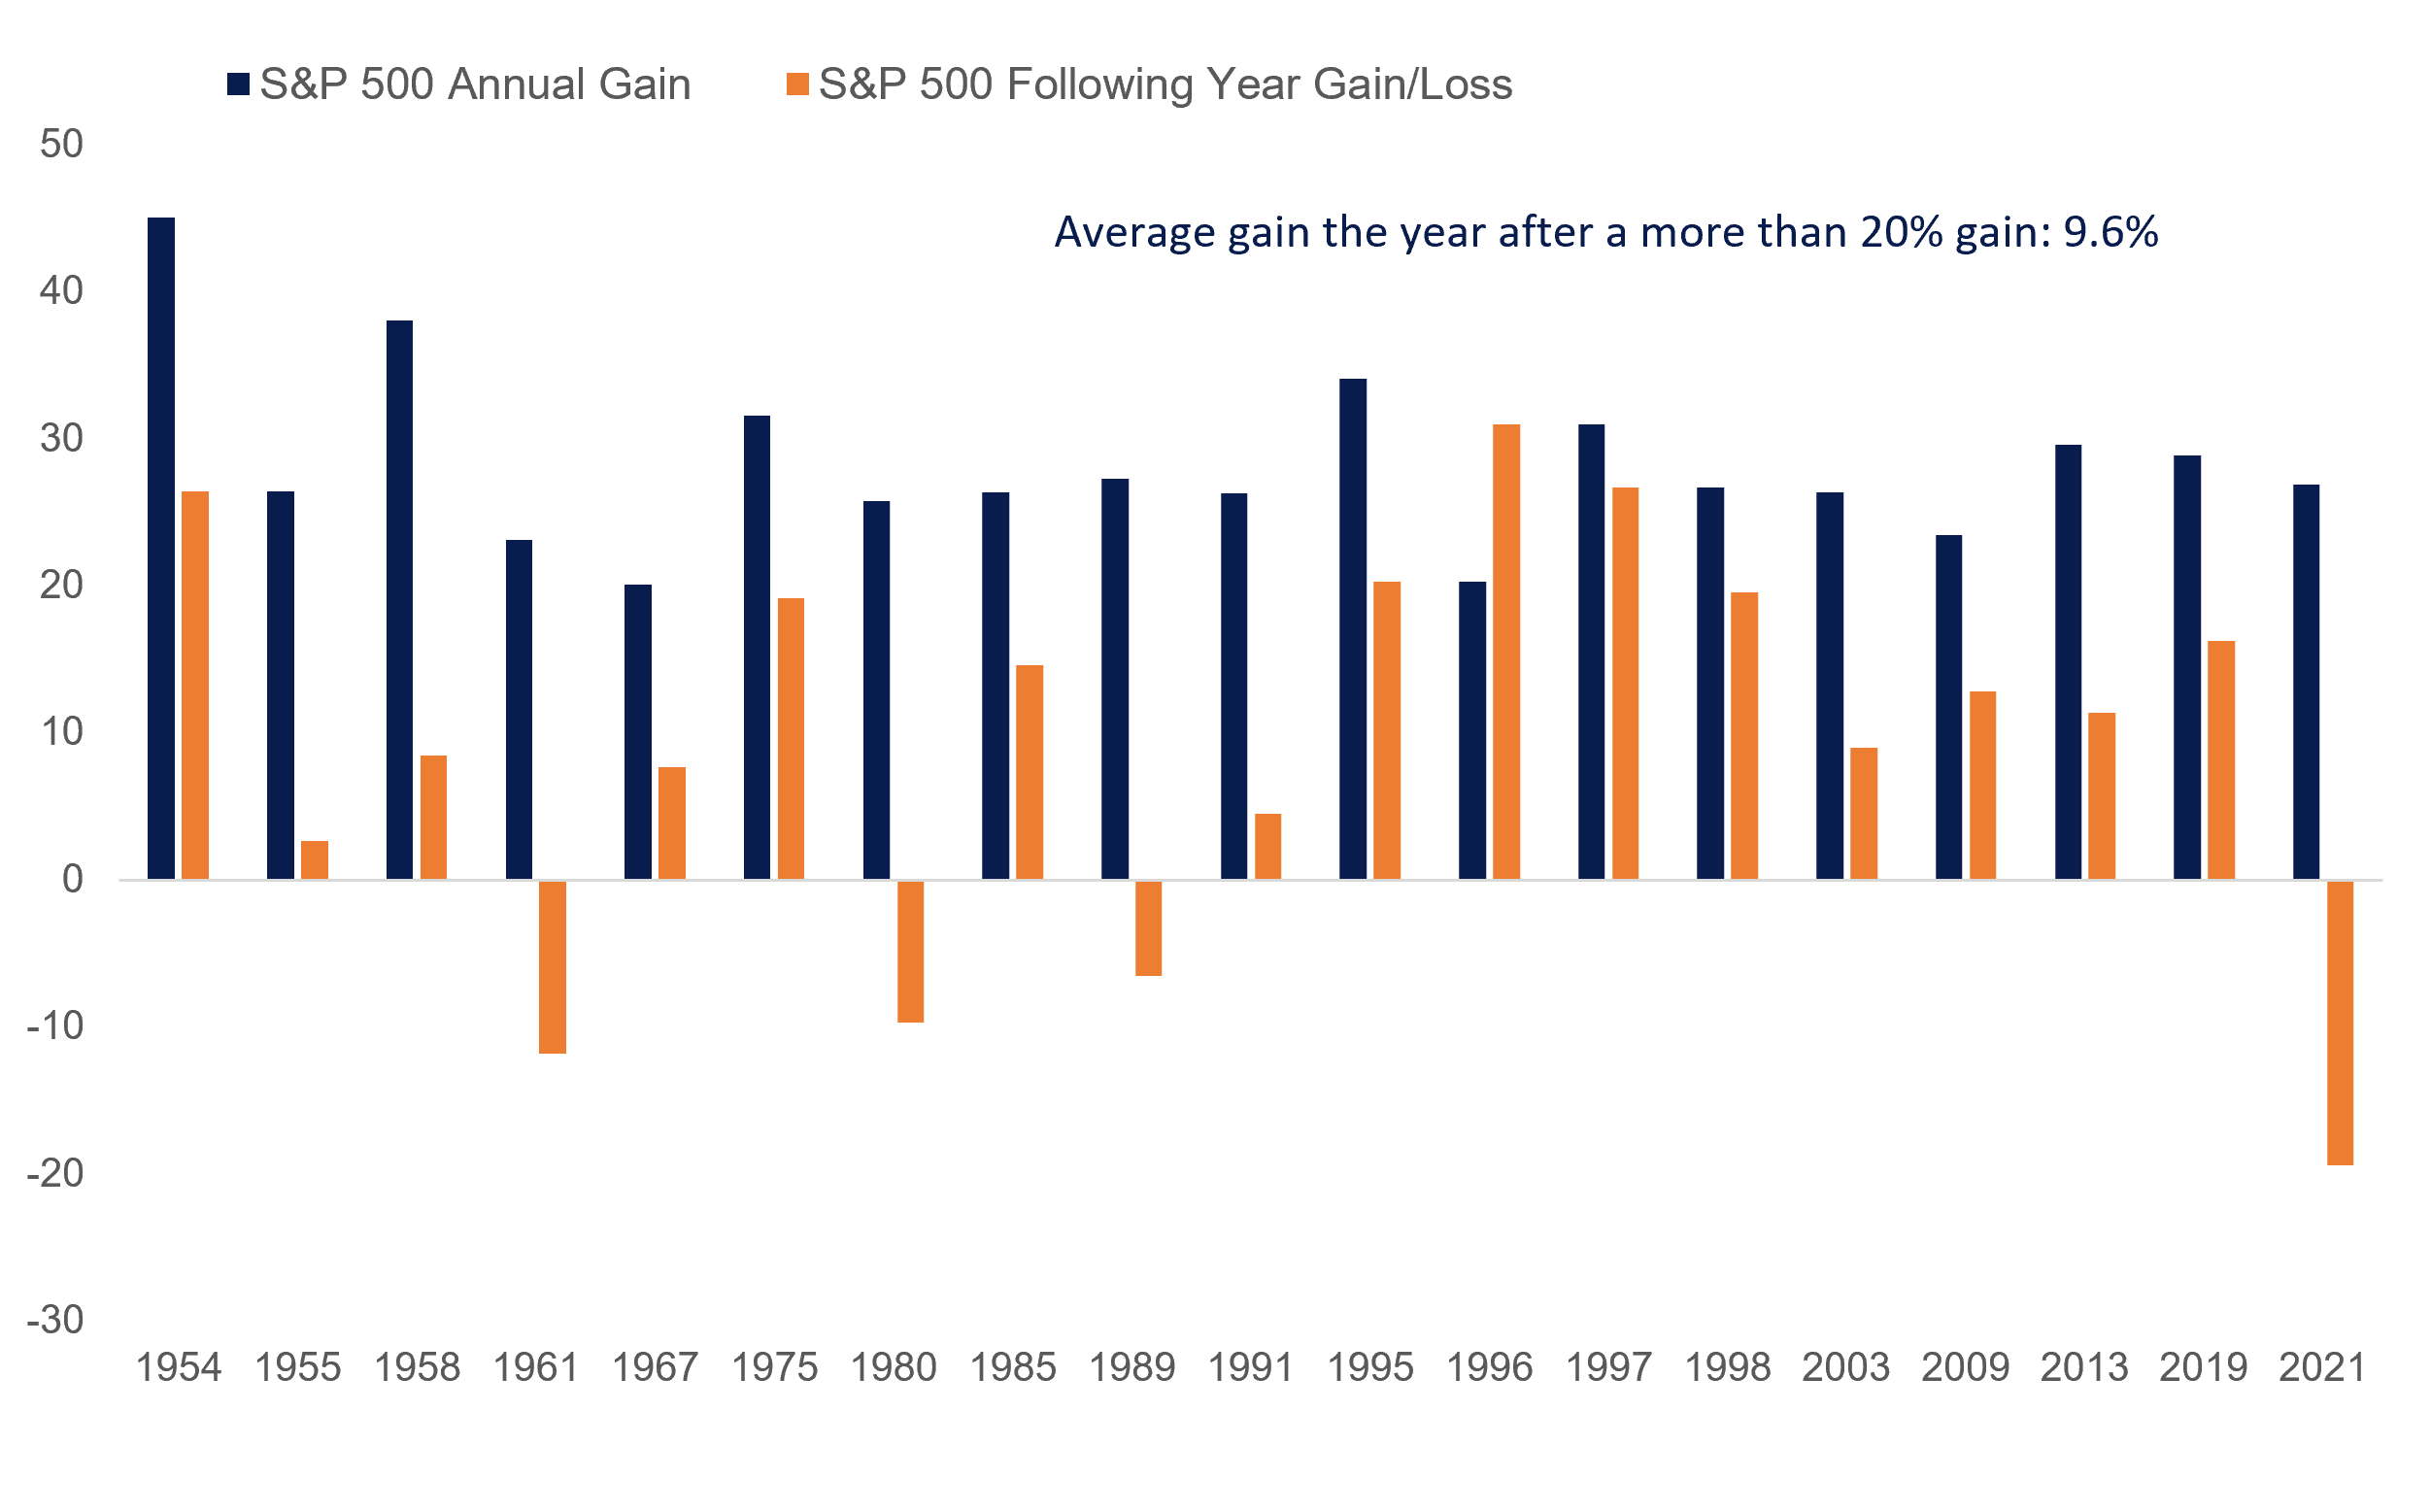 Bar graph depicting years after the S&P 500 gains 20%; the average gain the next year has been 9.6% historically. 